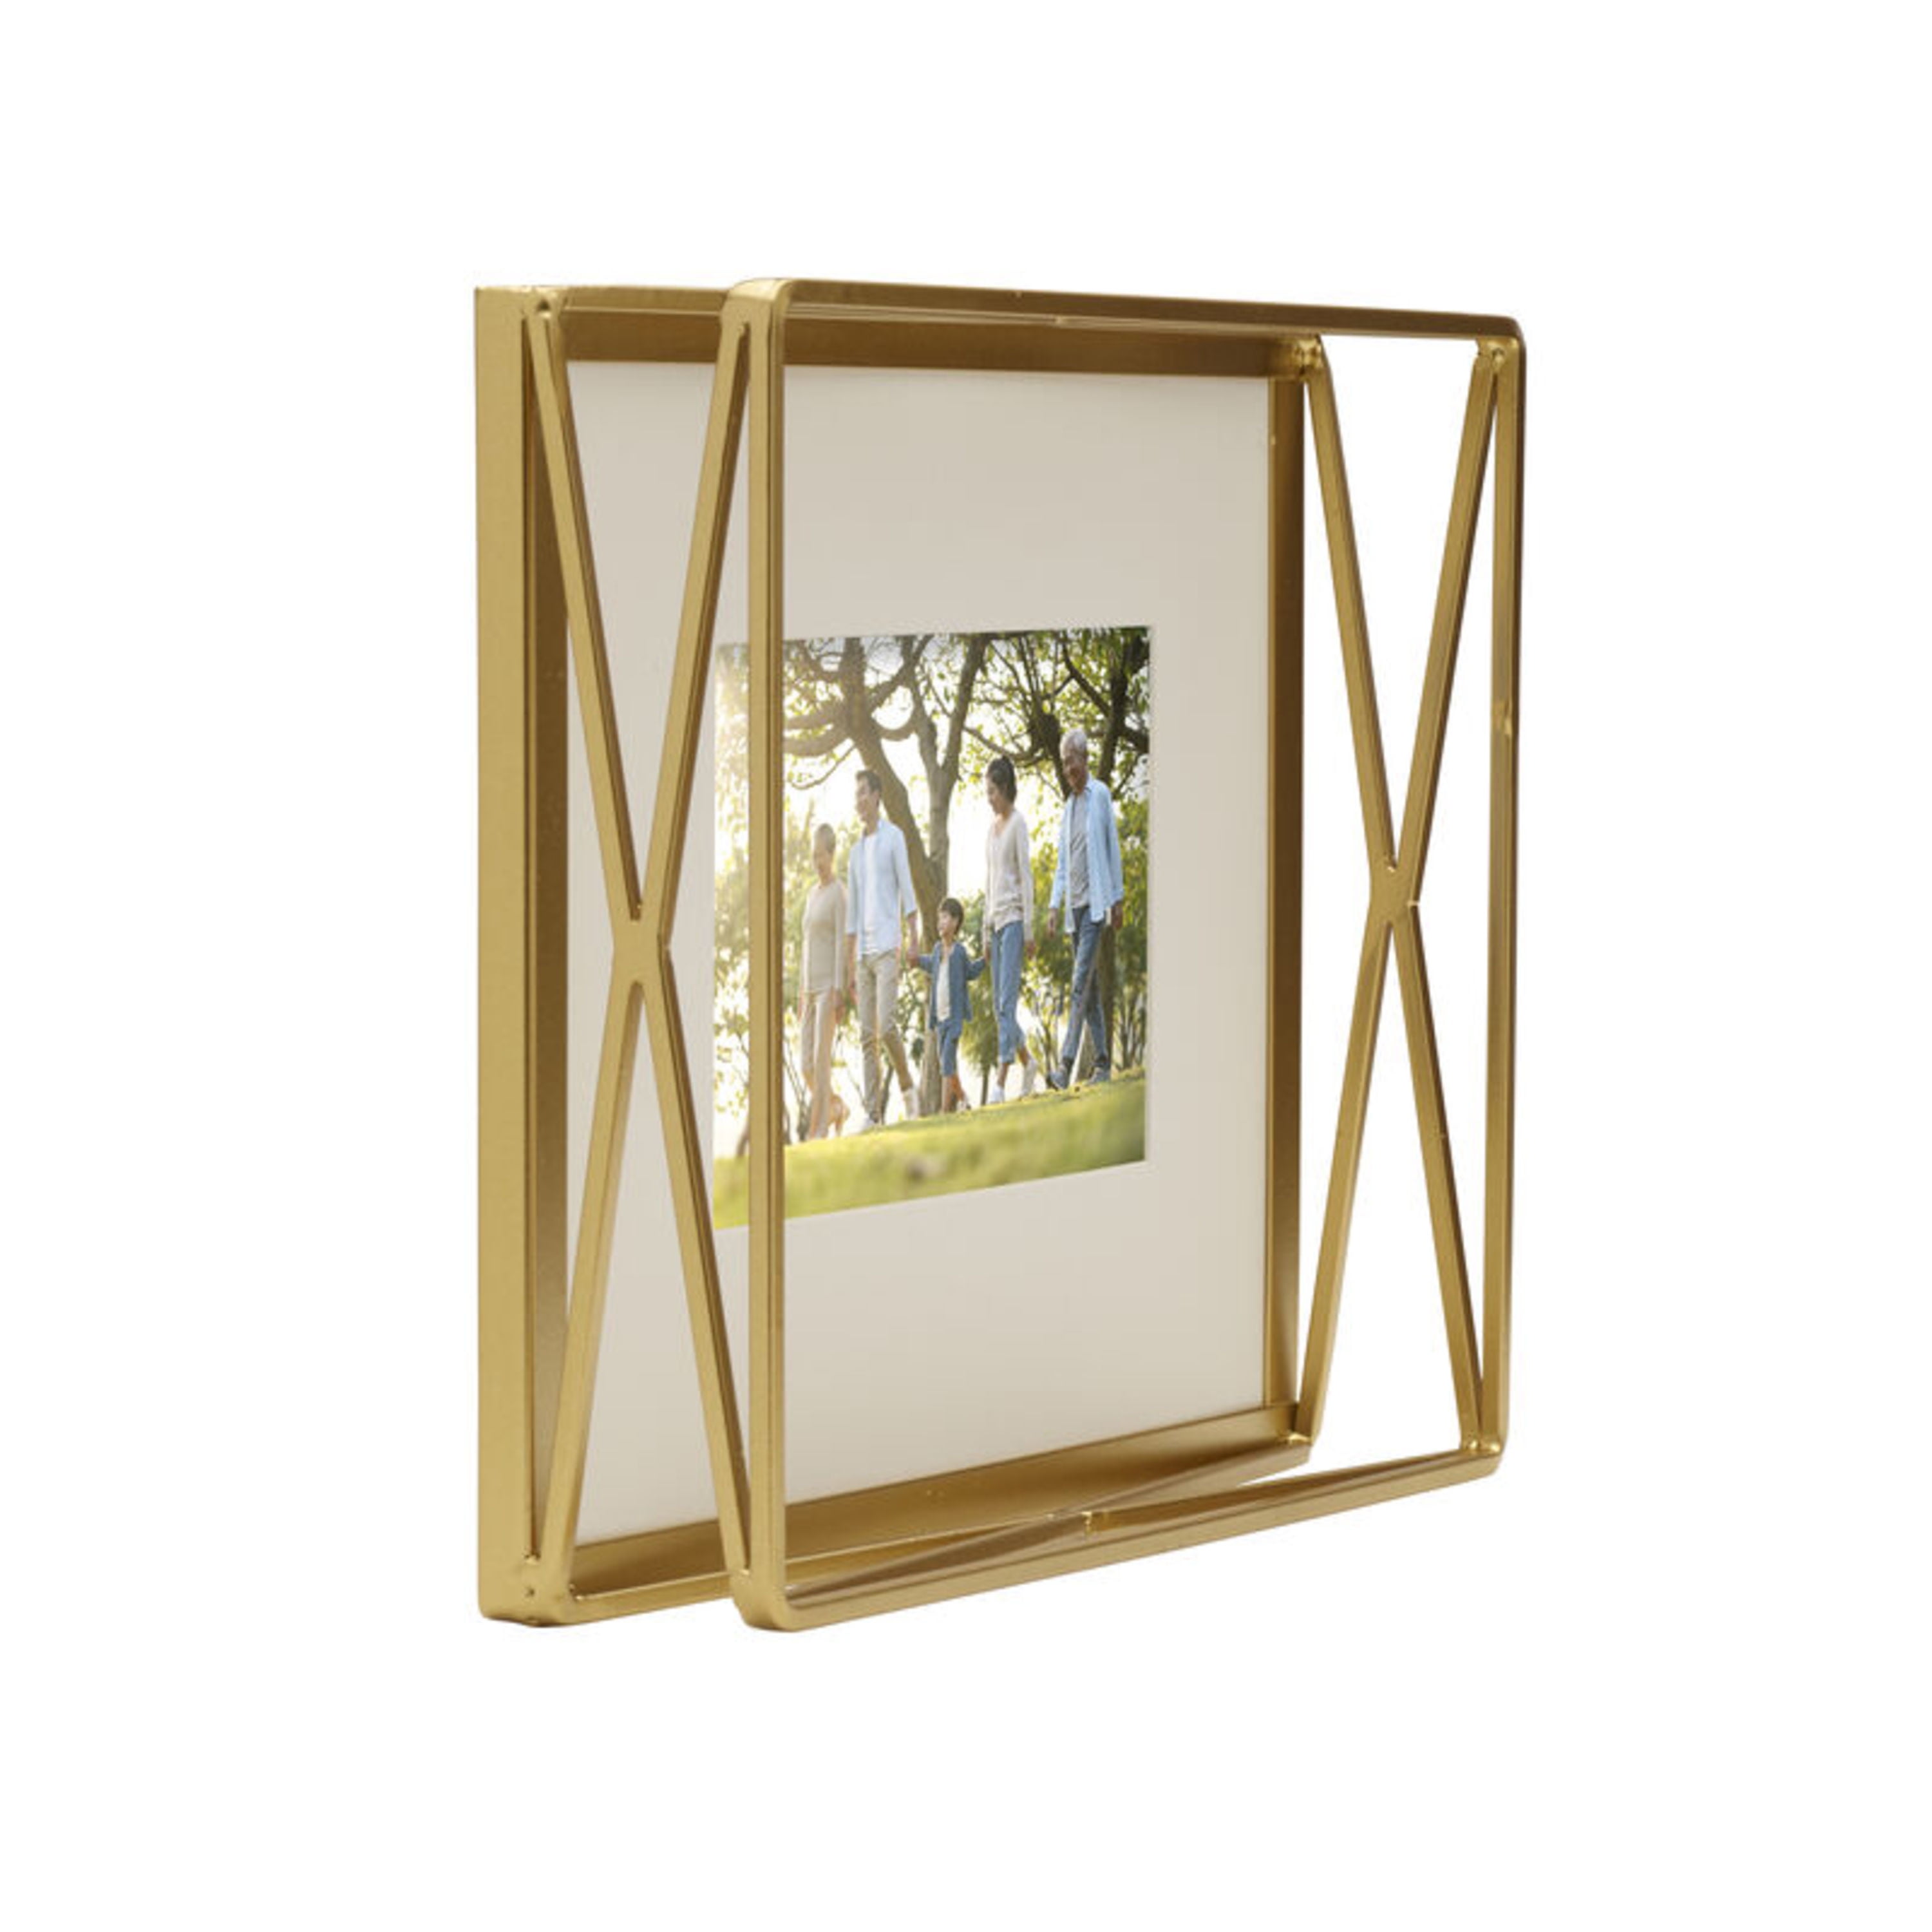 New 3.5 x 5 Inch Picture Frame Gold Metal & Glass Freestanding or Wallmount 